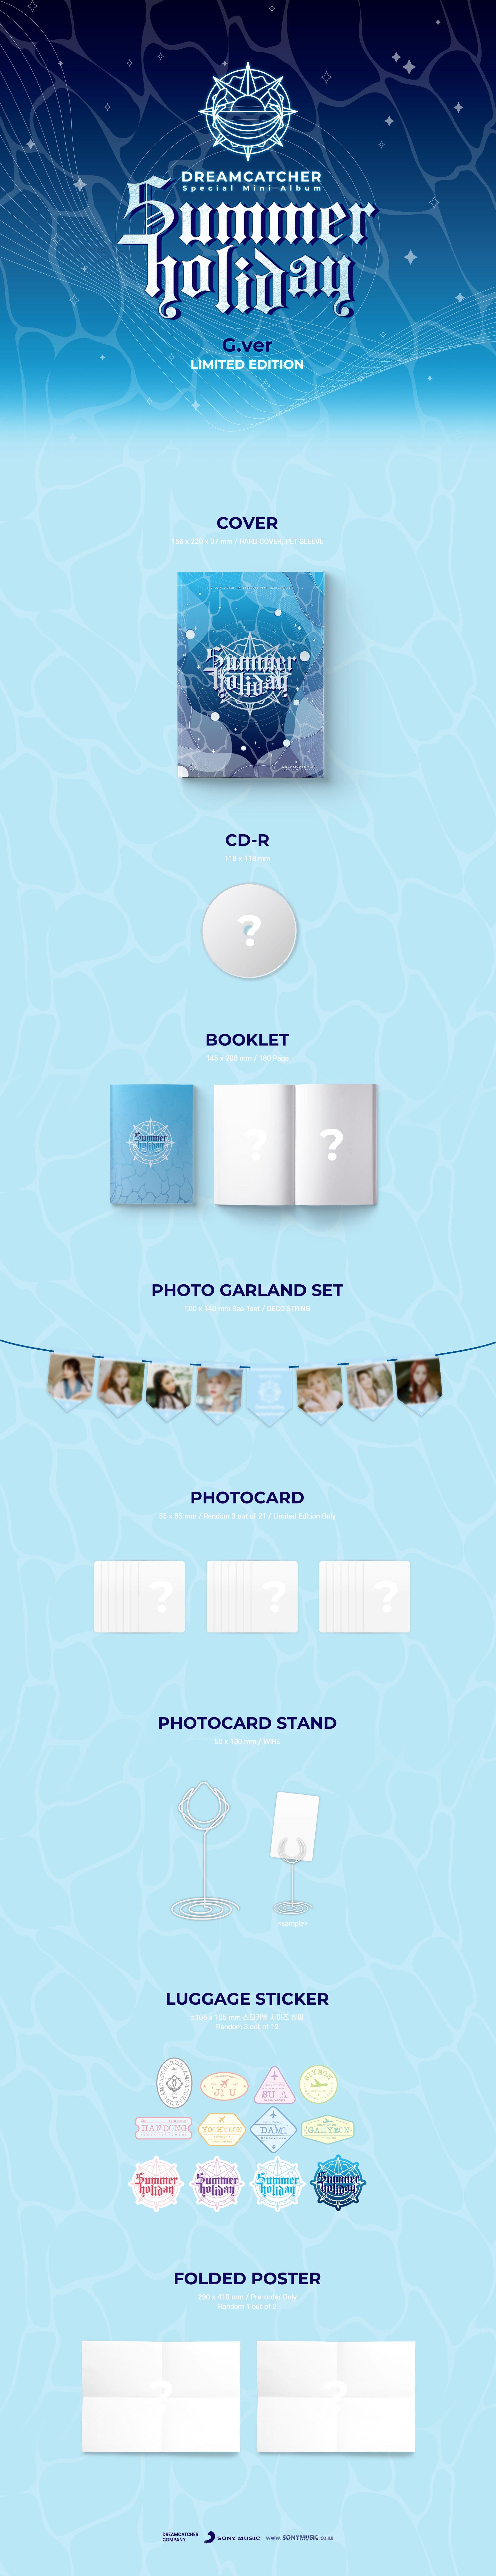 DREAMCATCHER - Summer Holiday (Limited Edition) - Special Mini Album